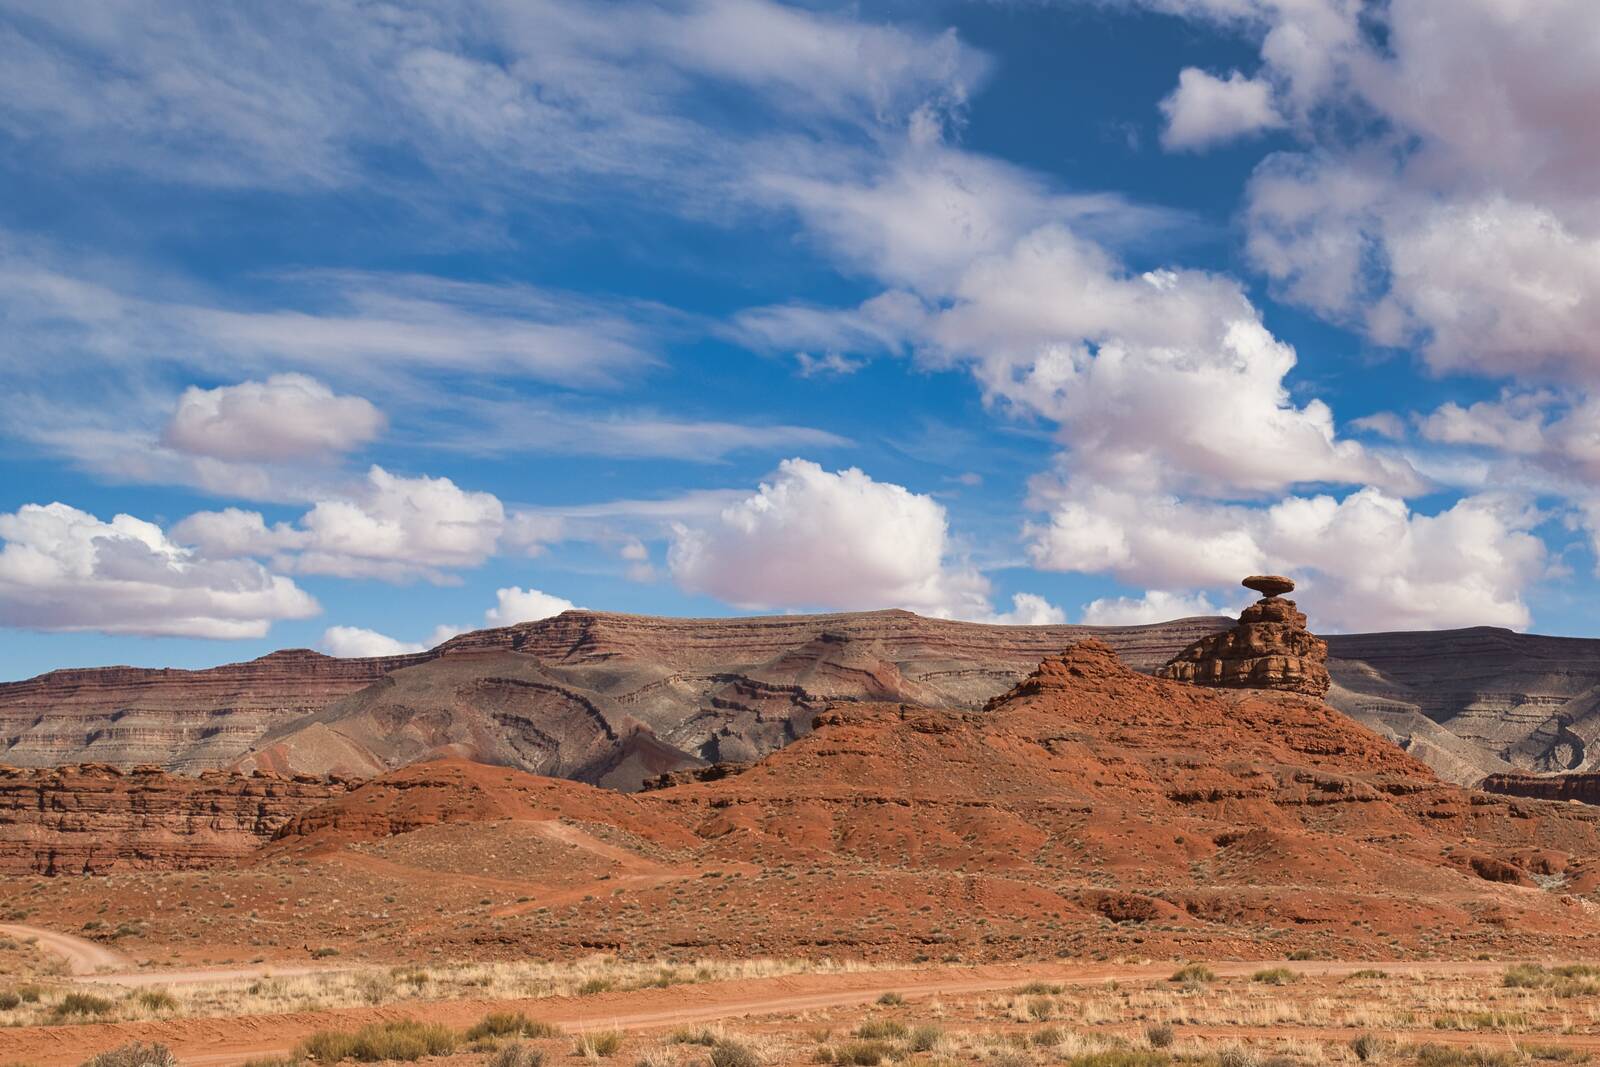 Image of Mexican Hat Rock by Steve West